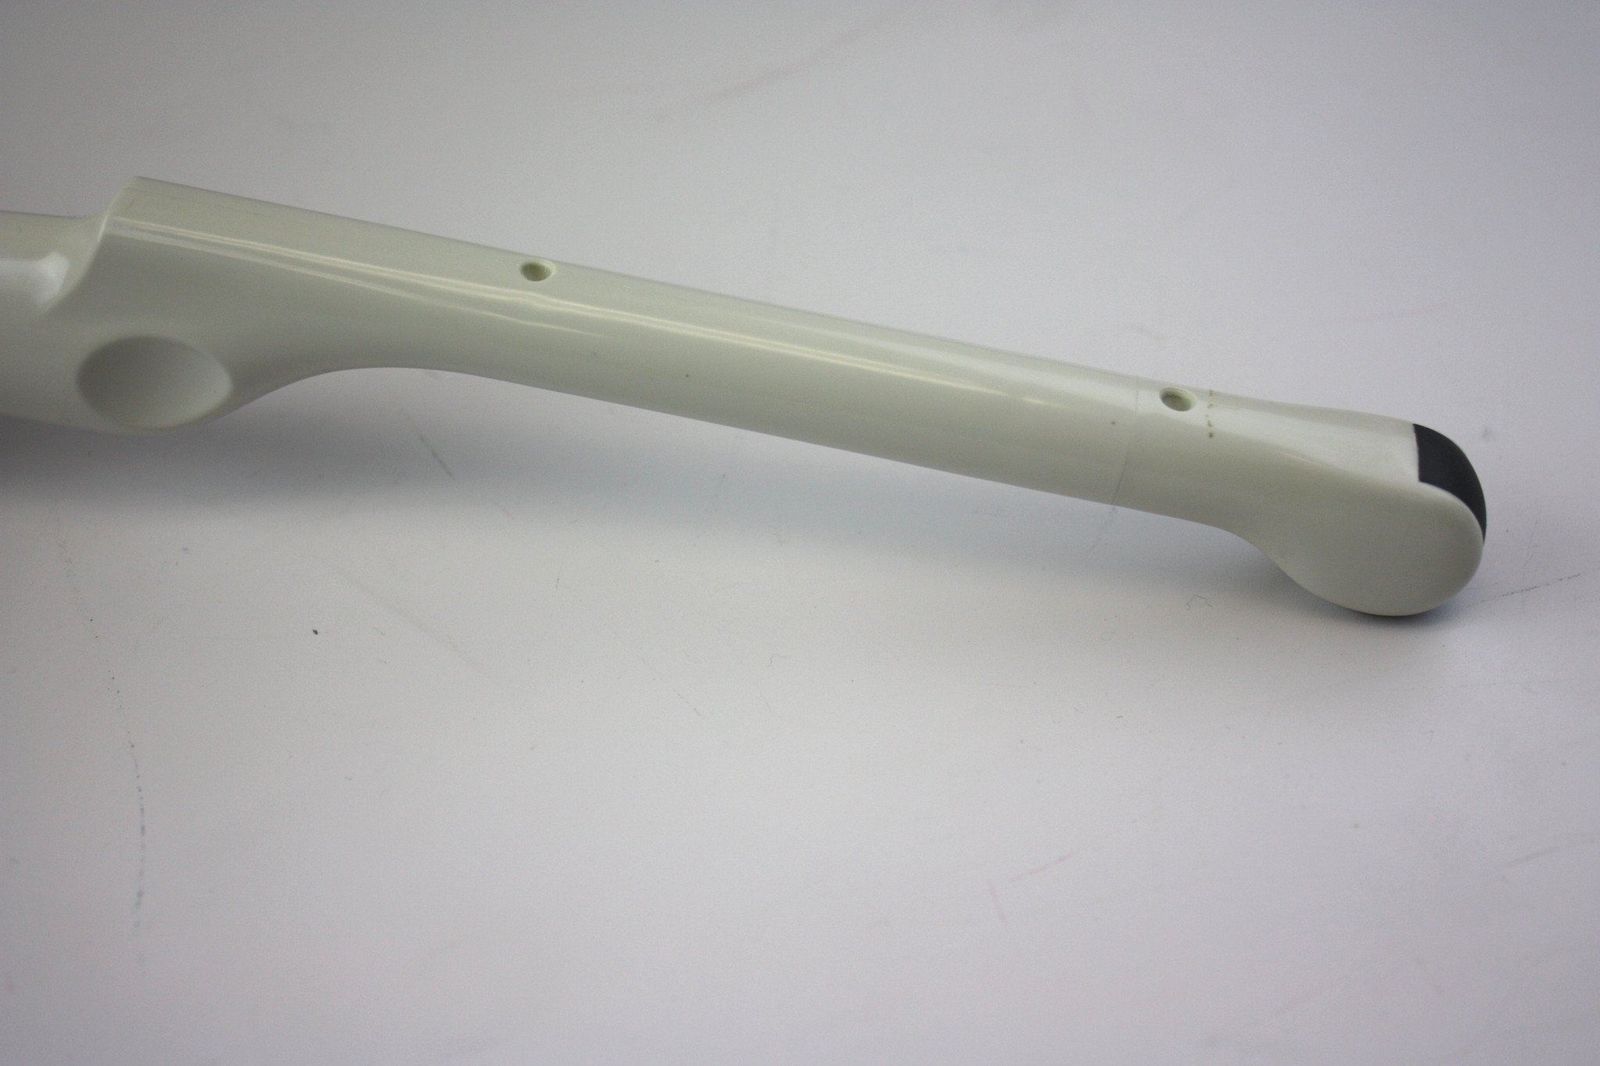 Transvaginal Probe for Chison 8300 DIAGNOSTIC ULTRASOUND MACHINES FOR SALE